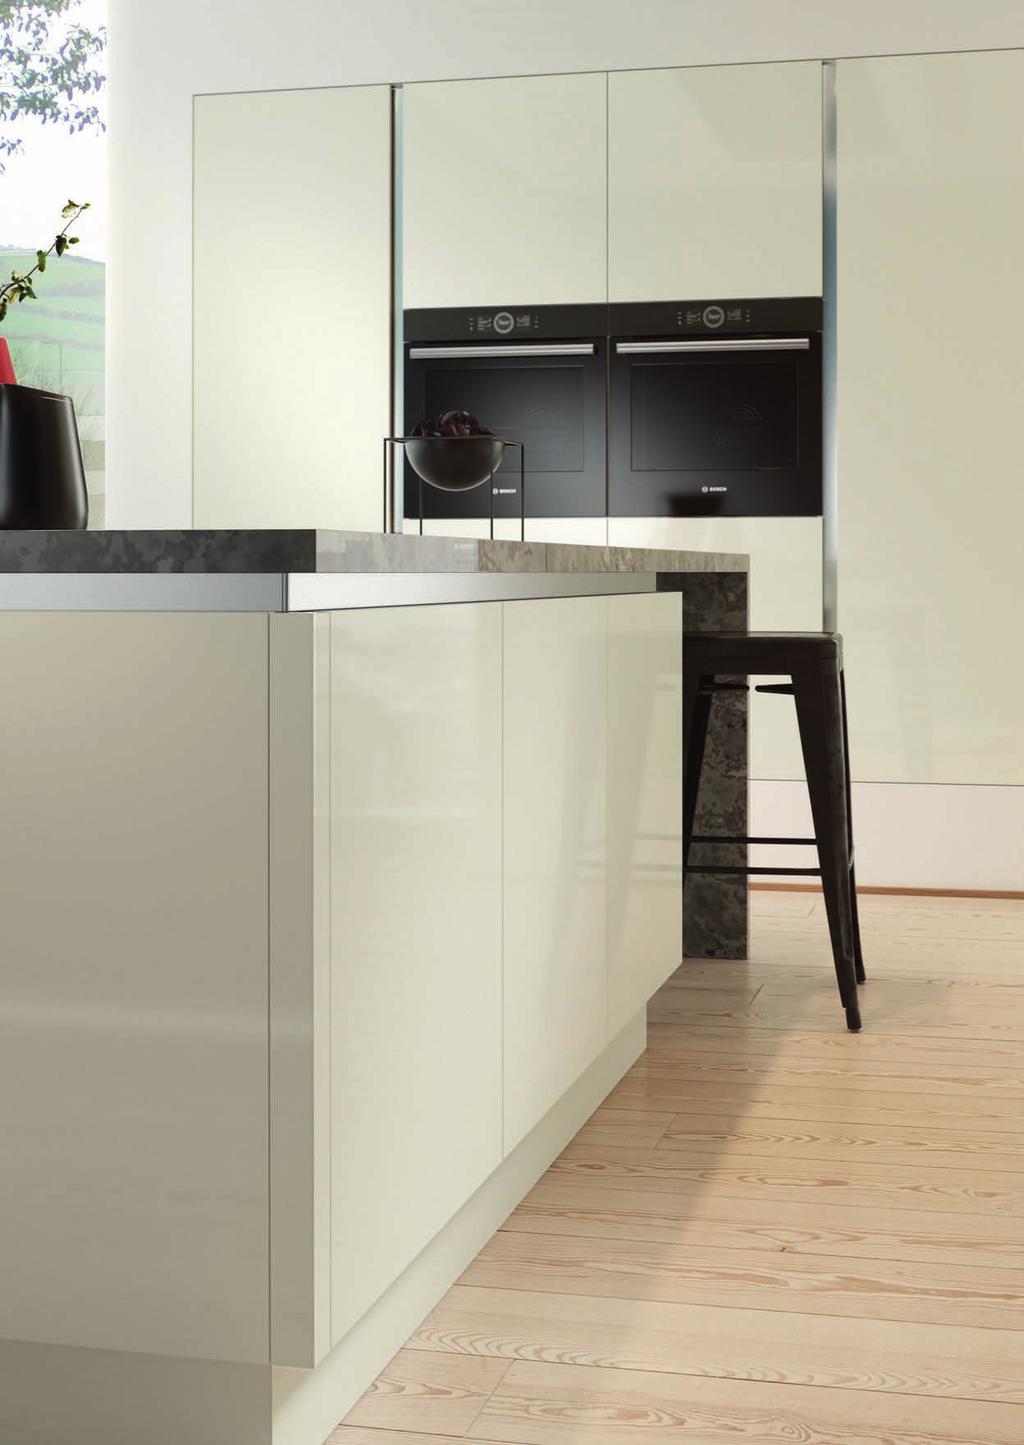 . KITCHEN DOORS for Vero Finalise your Vero kitchen by choosing a door range. 5 door ranges to choose from, with sizes designed specifically for the Vero handleless rail system.